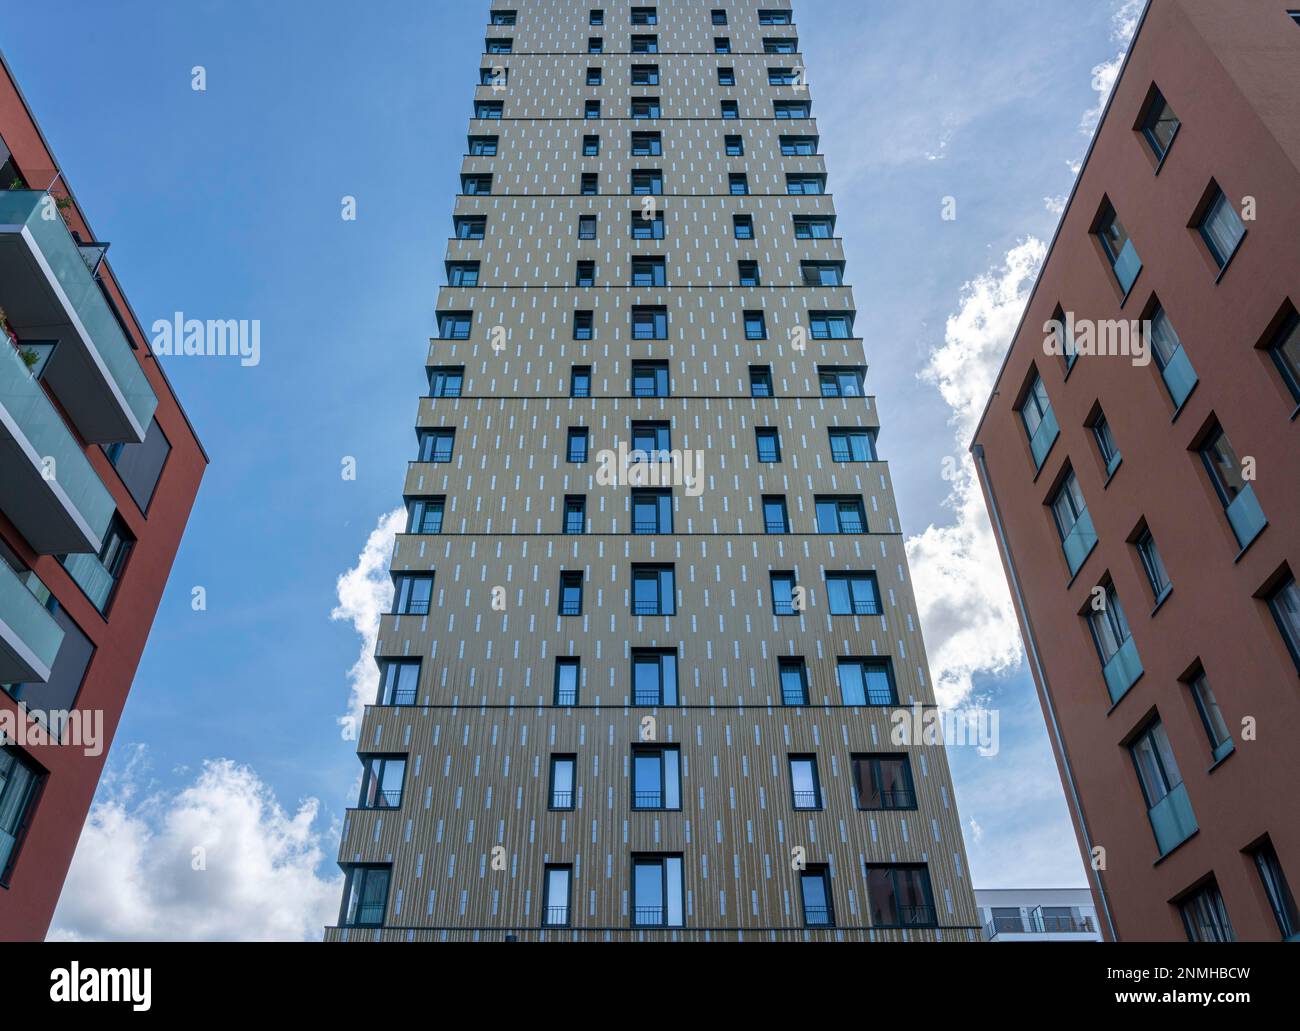 Modern architecture and social housing in Berlin, Germany Stock Photo